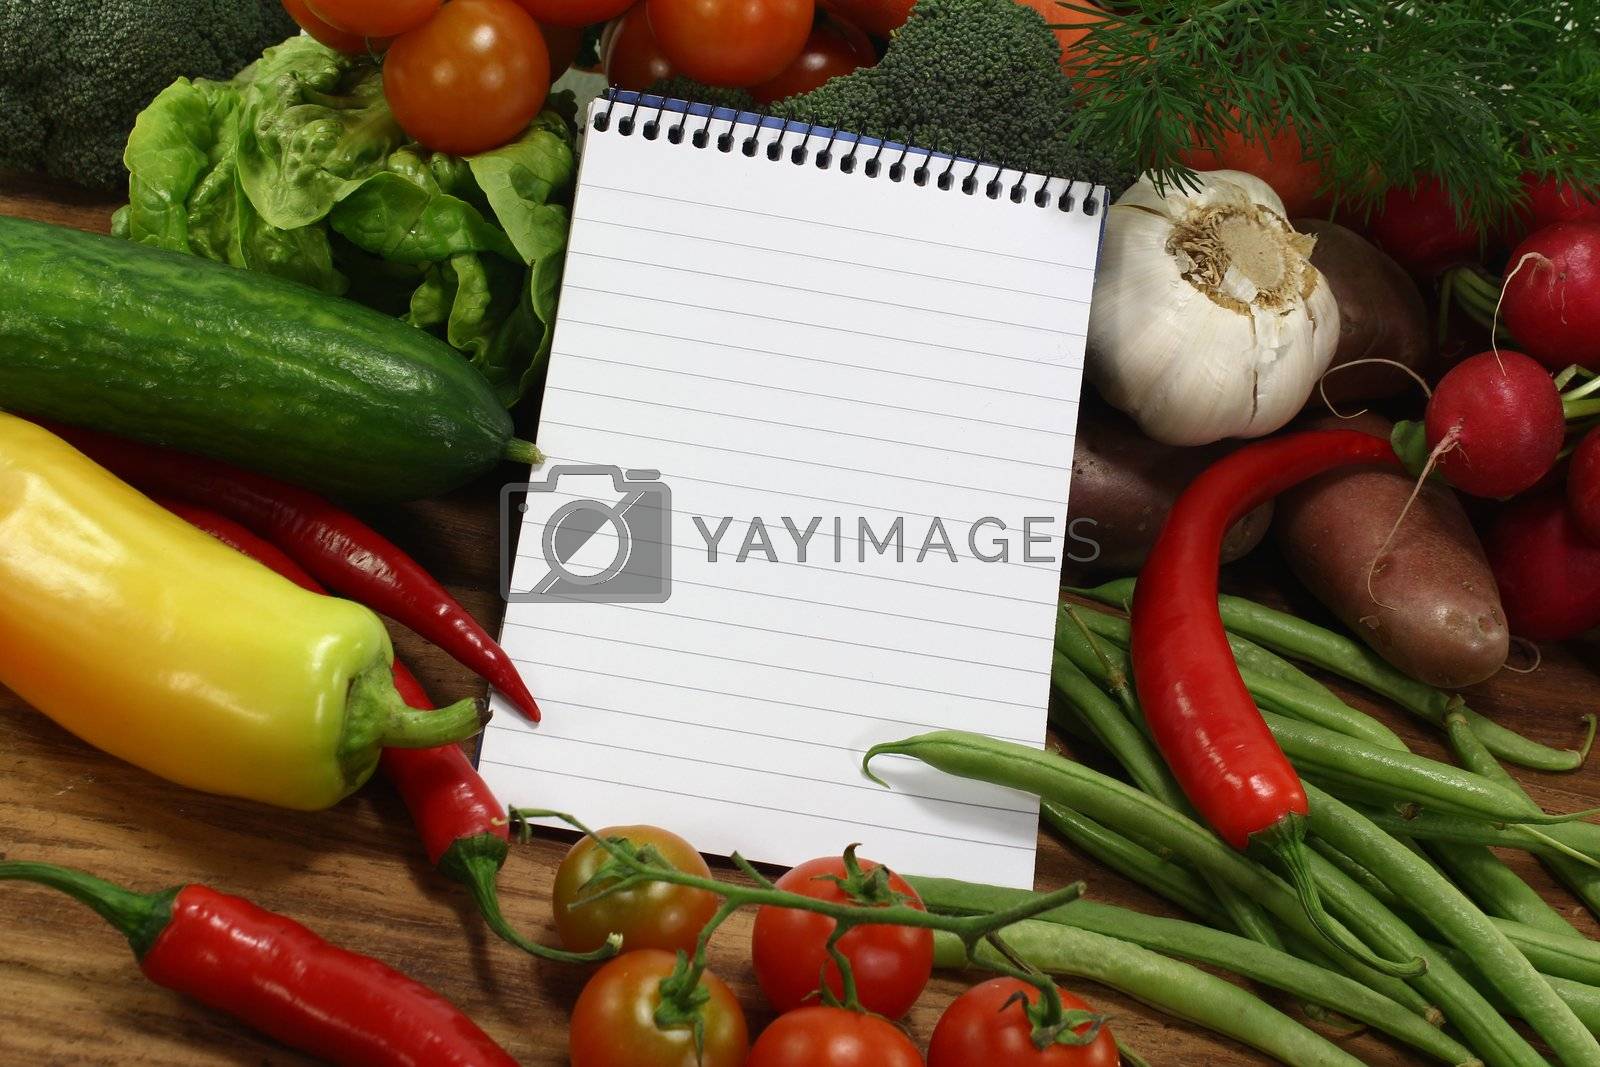 Royalty free image of shopping list with fresh vegetables by discovery